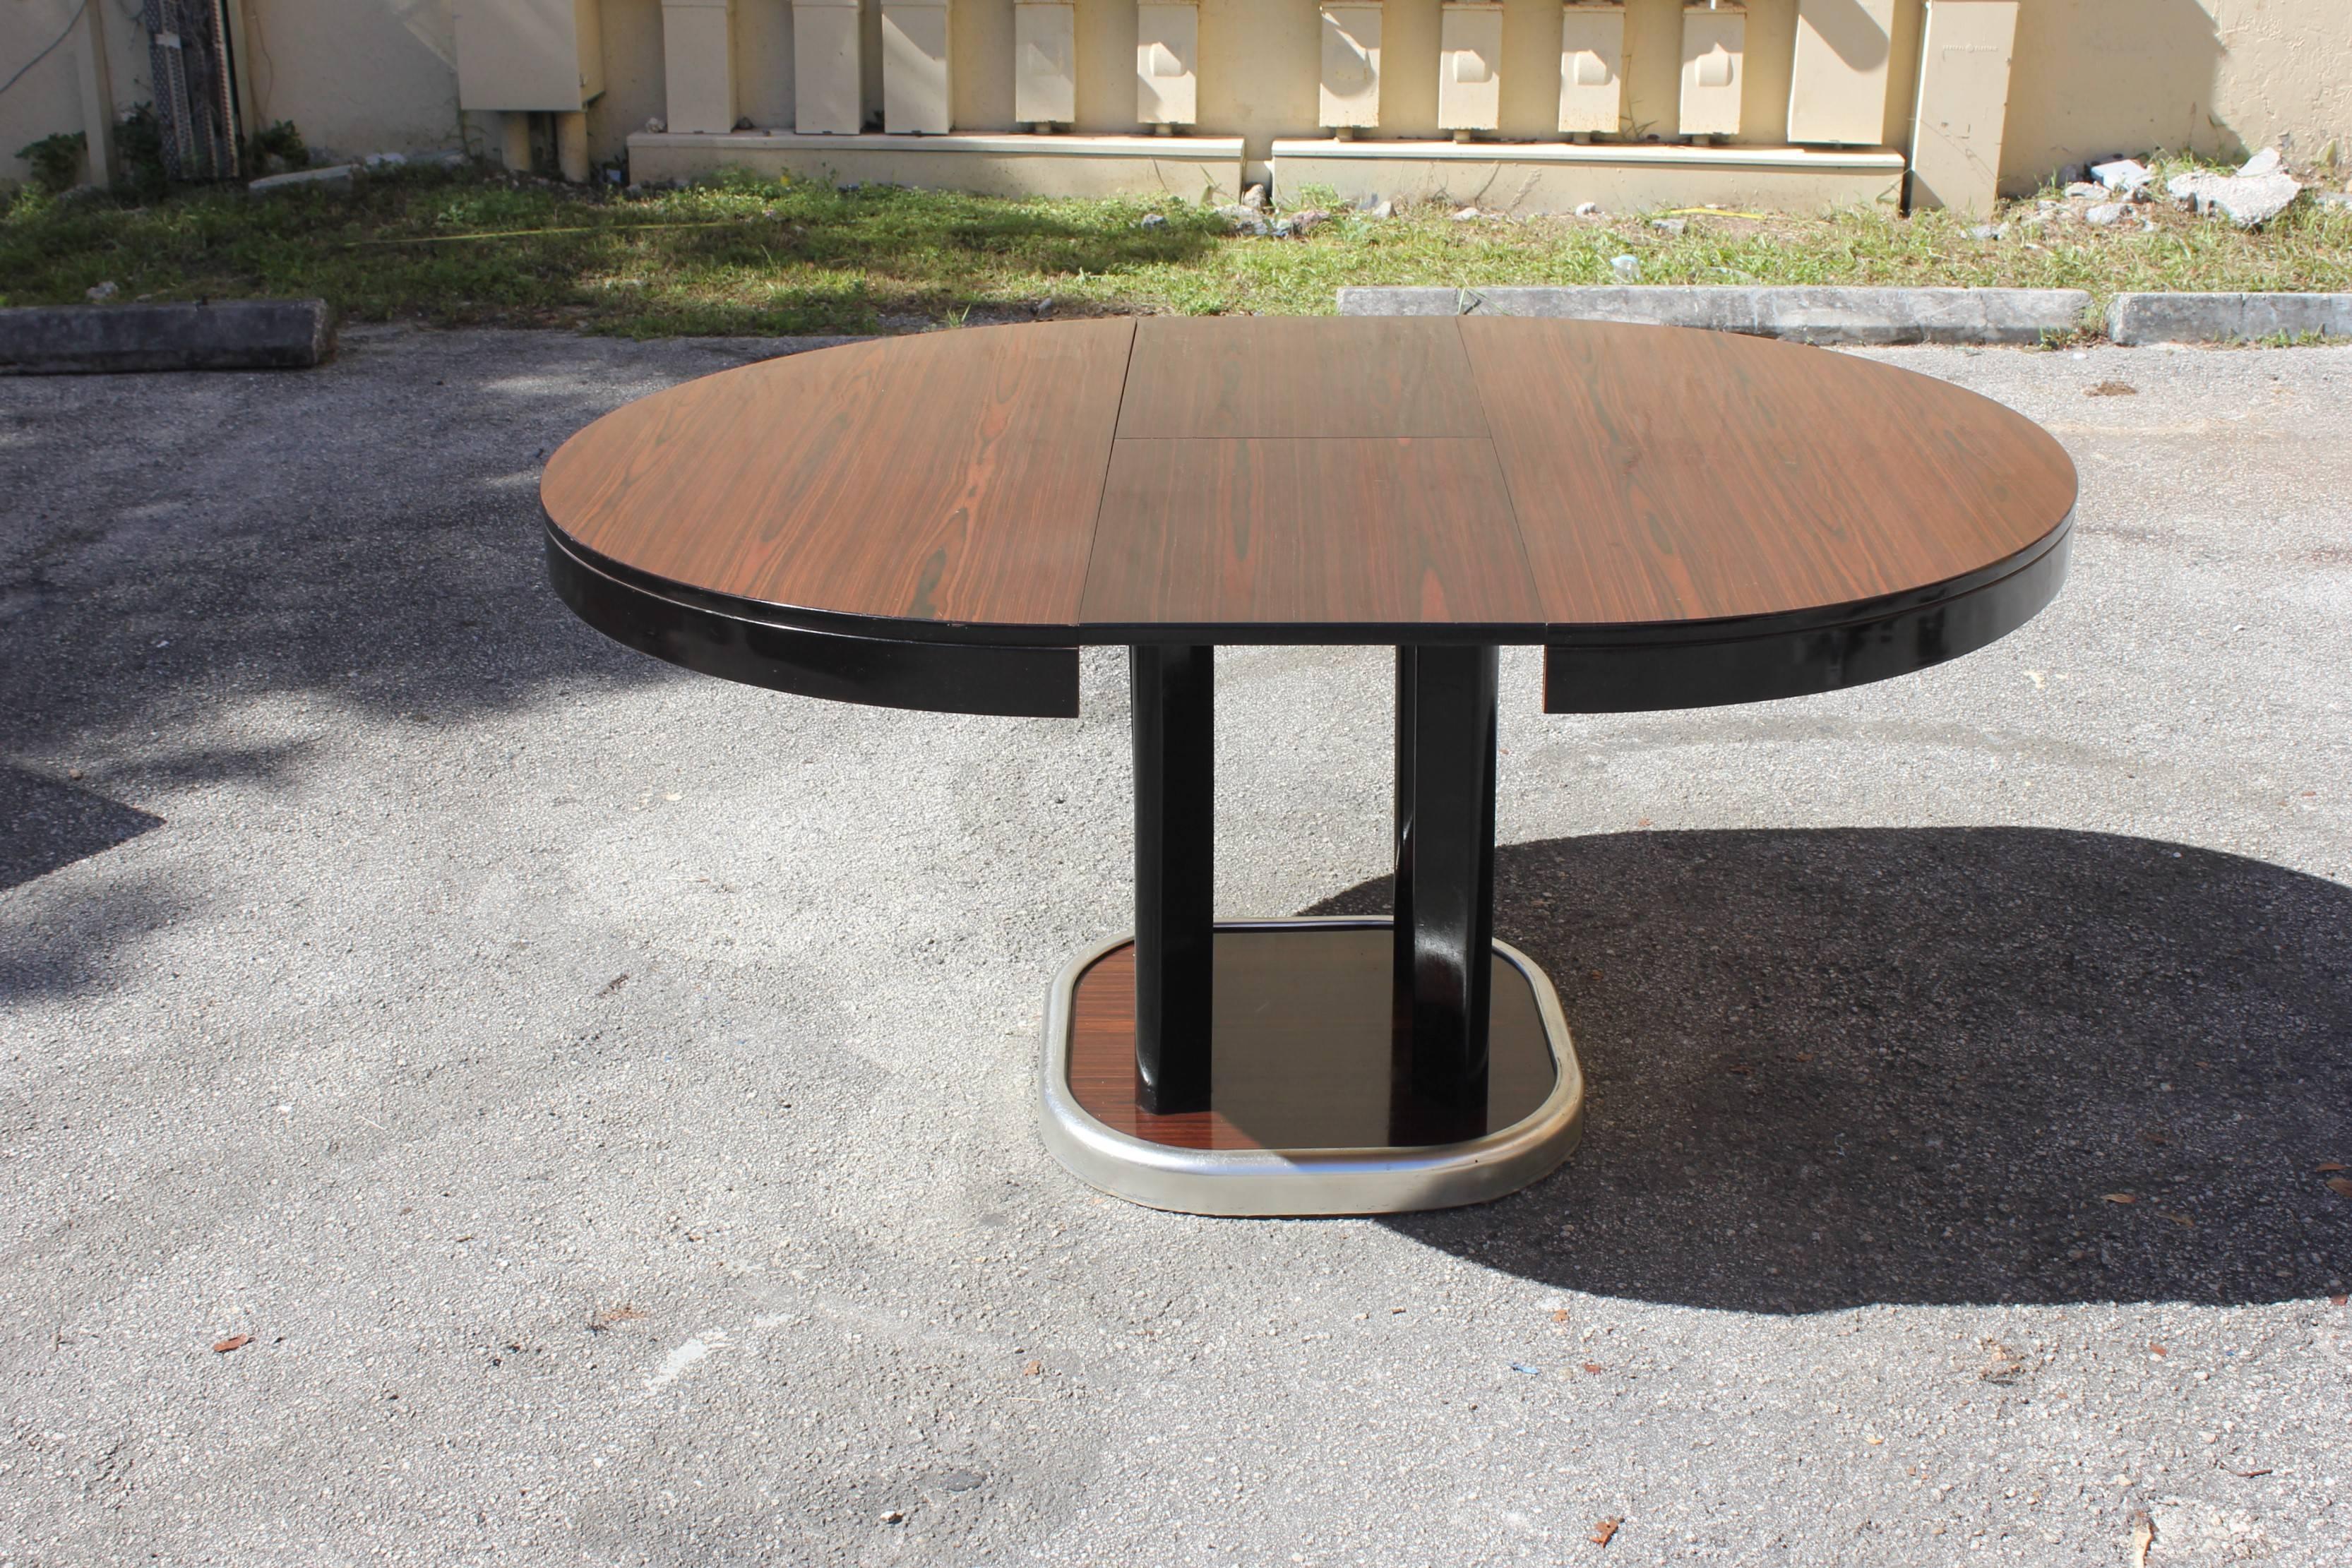 French art deco exotic Macassar ebony round dining table with built in extension leaf. Outstanding French art deco or art modern Macassar ebony expandable dining table from the 1940s. Beautiful four legs base. Accommodate, additional leaves. This